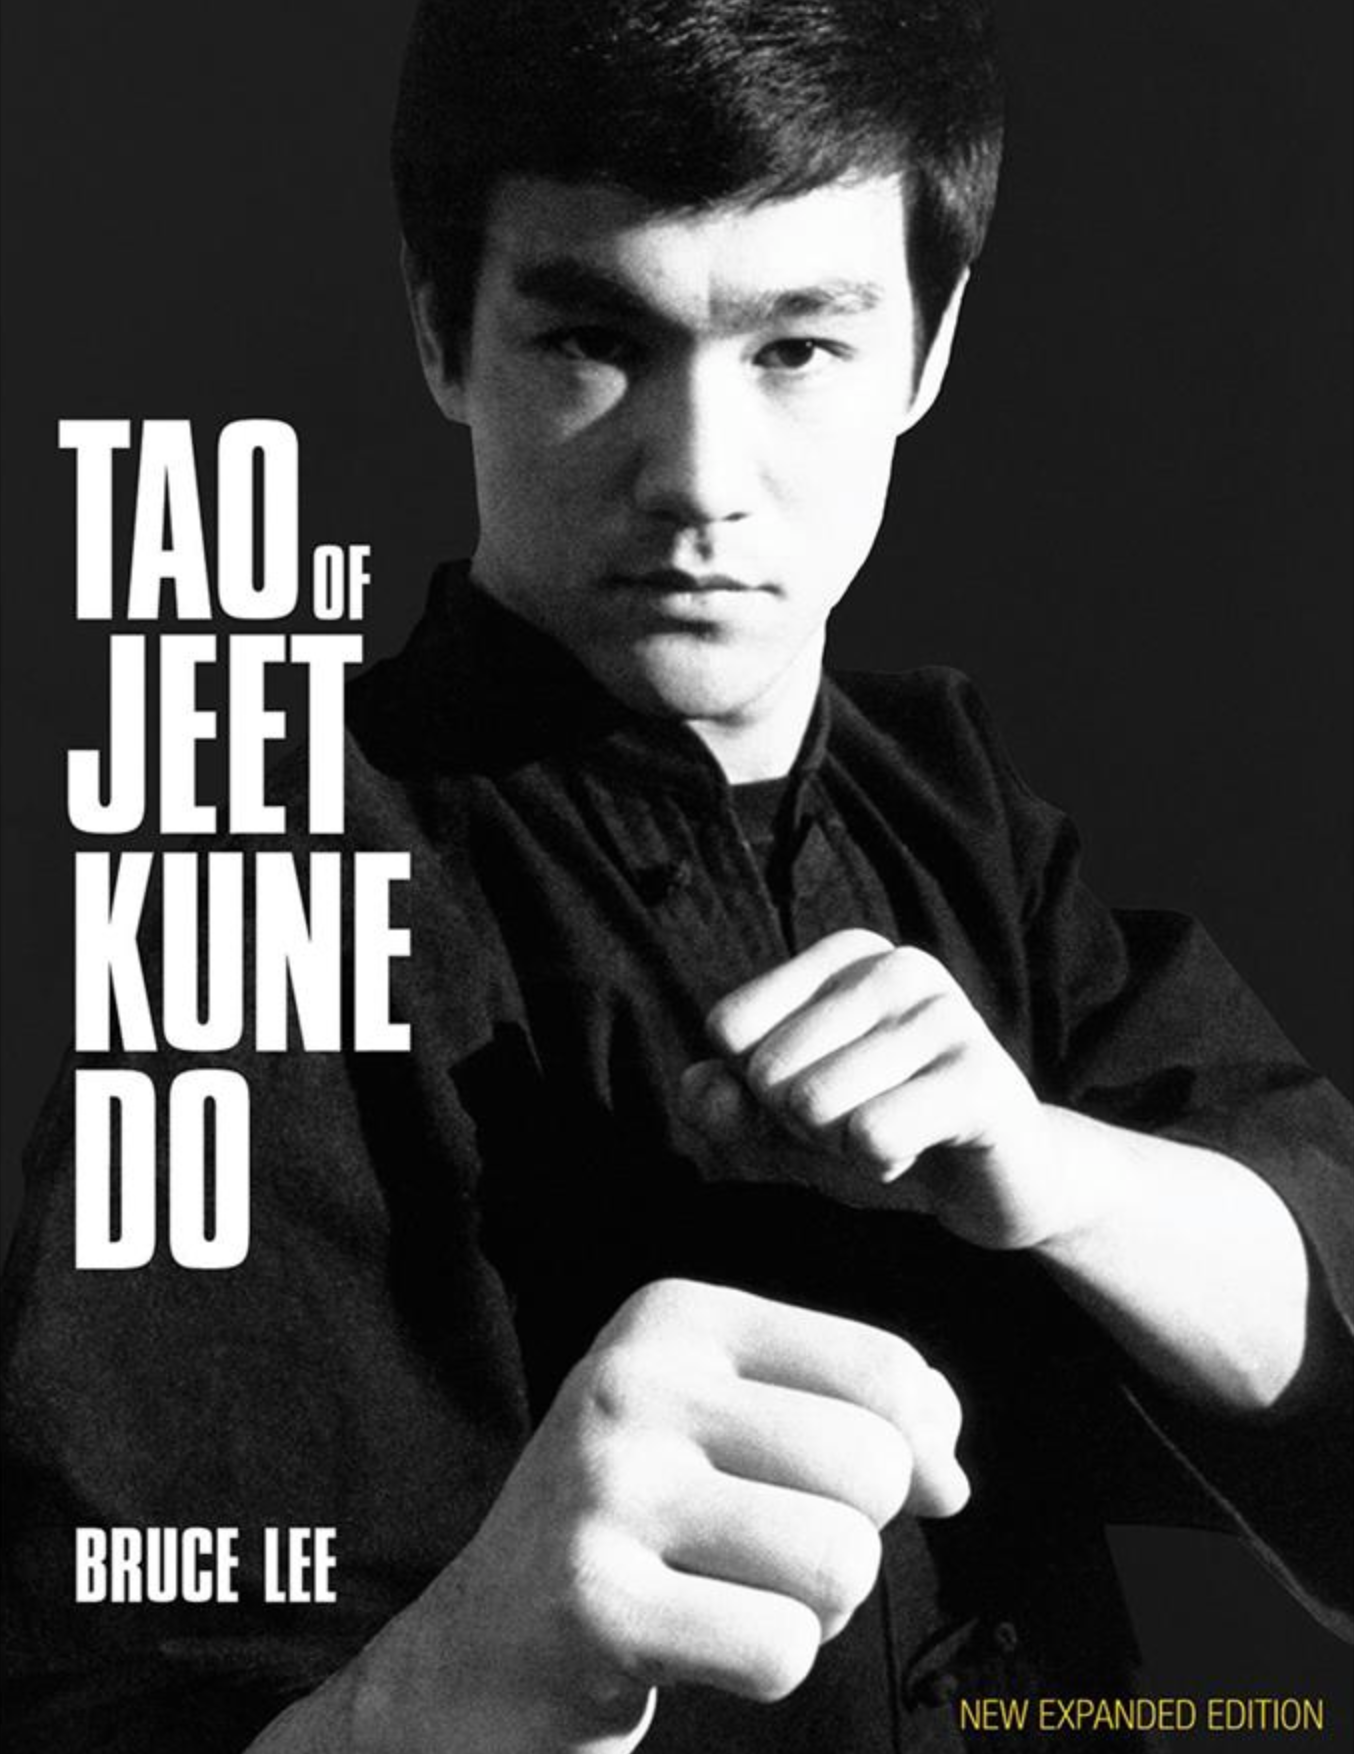 Tao of Jeet Kune Do: New Expanded Edition by Bruce Lee - Budovideos Inc